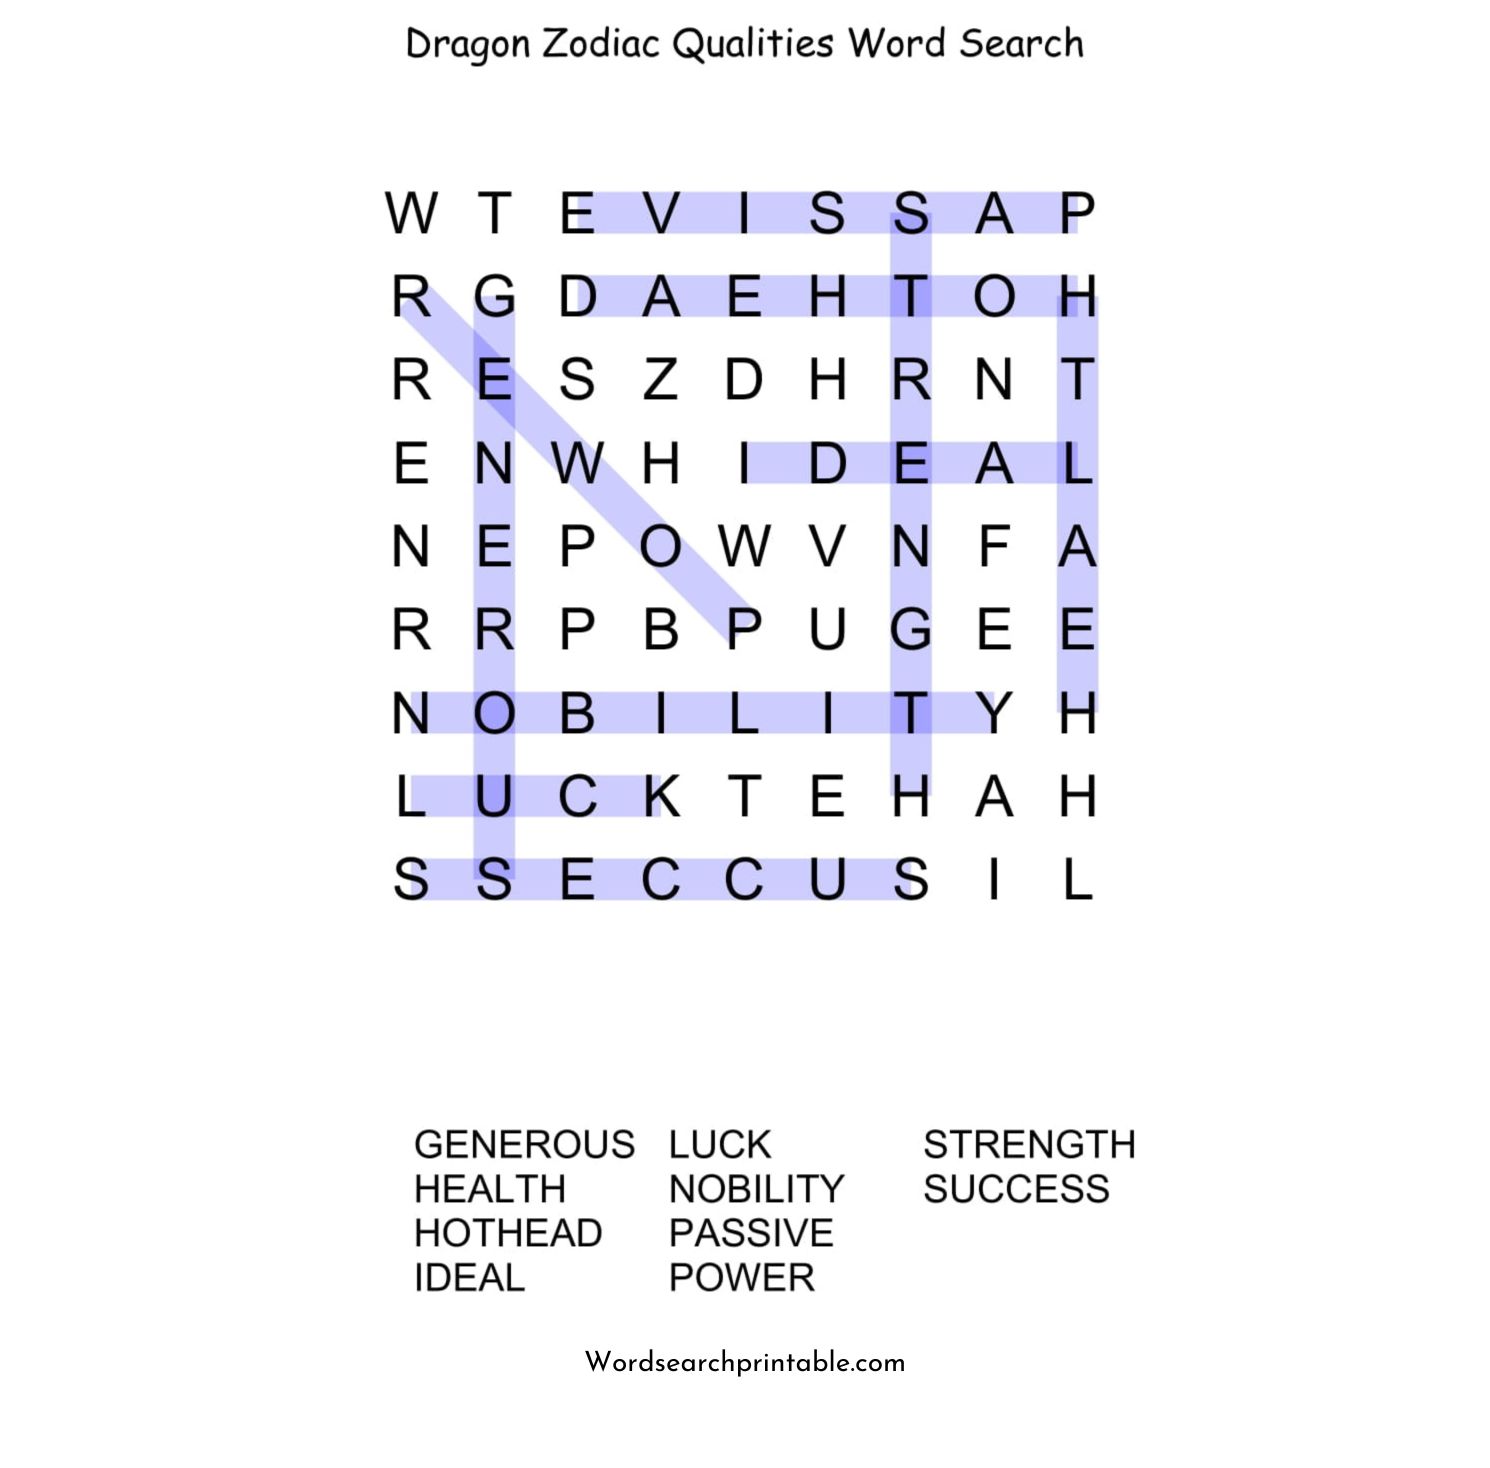 dragon zodiac qualities word search puzzle solution